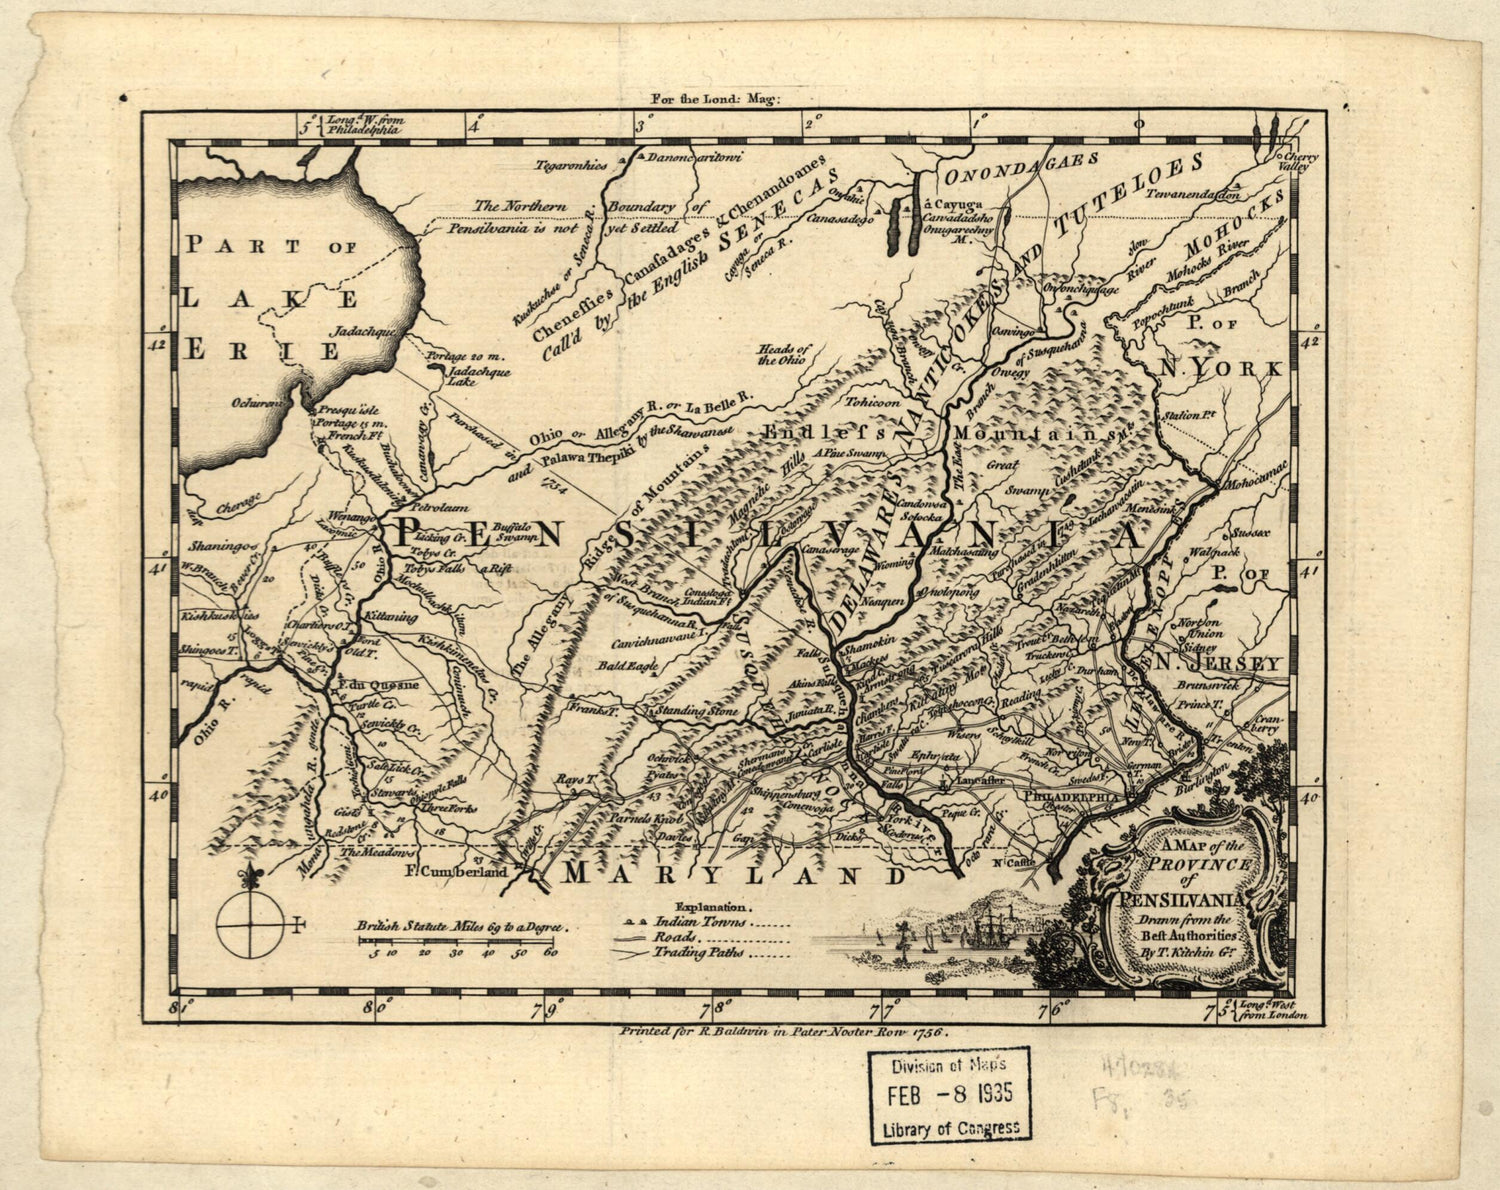 This old map of A Map of the Province of Pensilvania from 1756 was created by Richard Baldwin, Thomas Kitchin in 1756